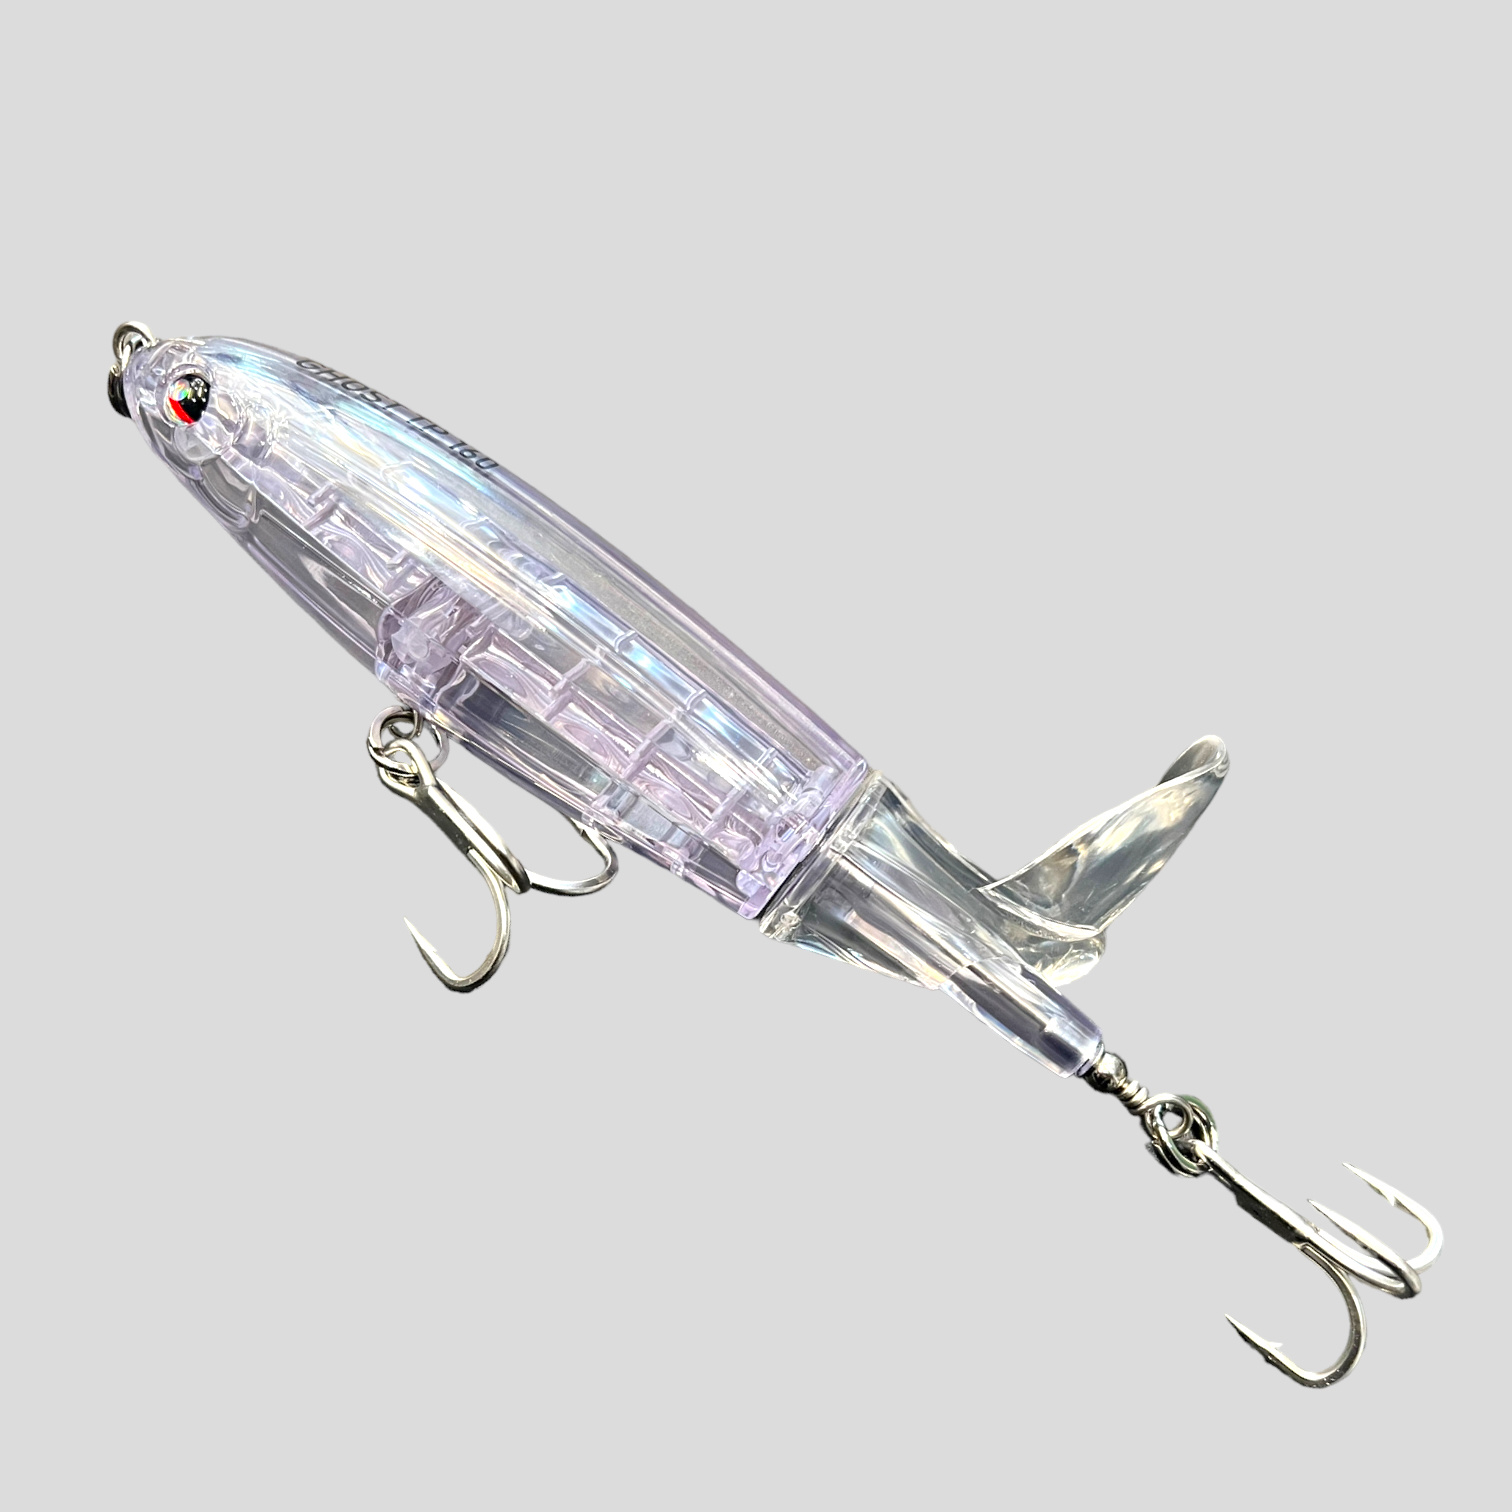 Clear Choice Lures Ghost Popper GP150